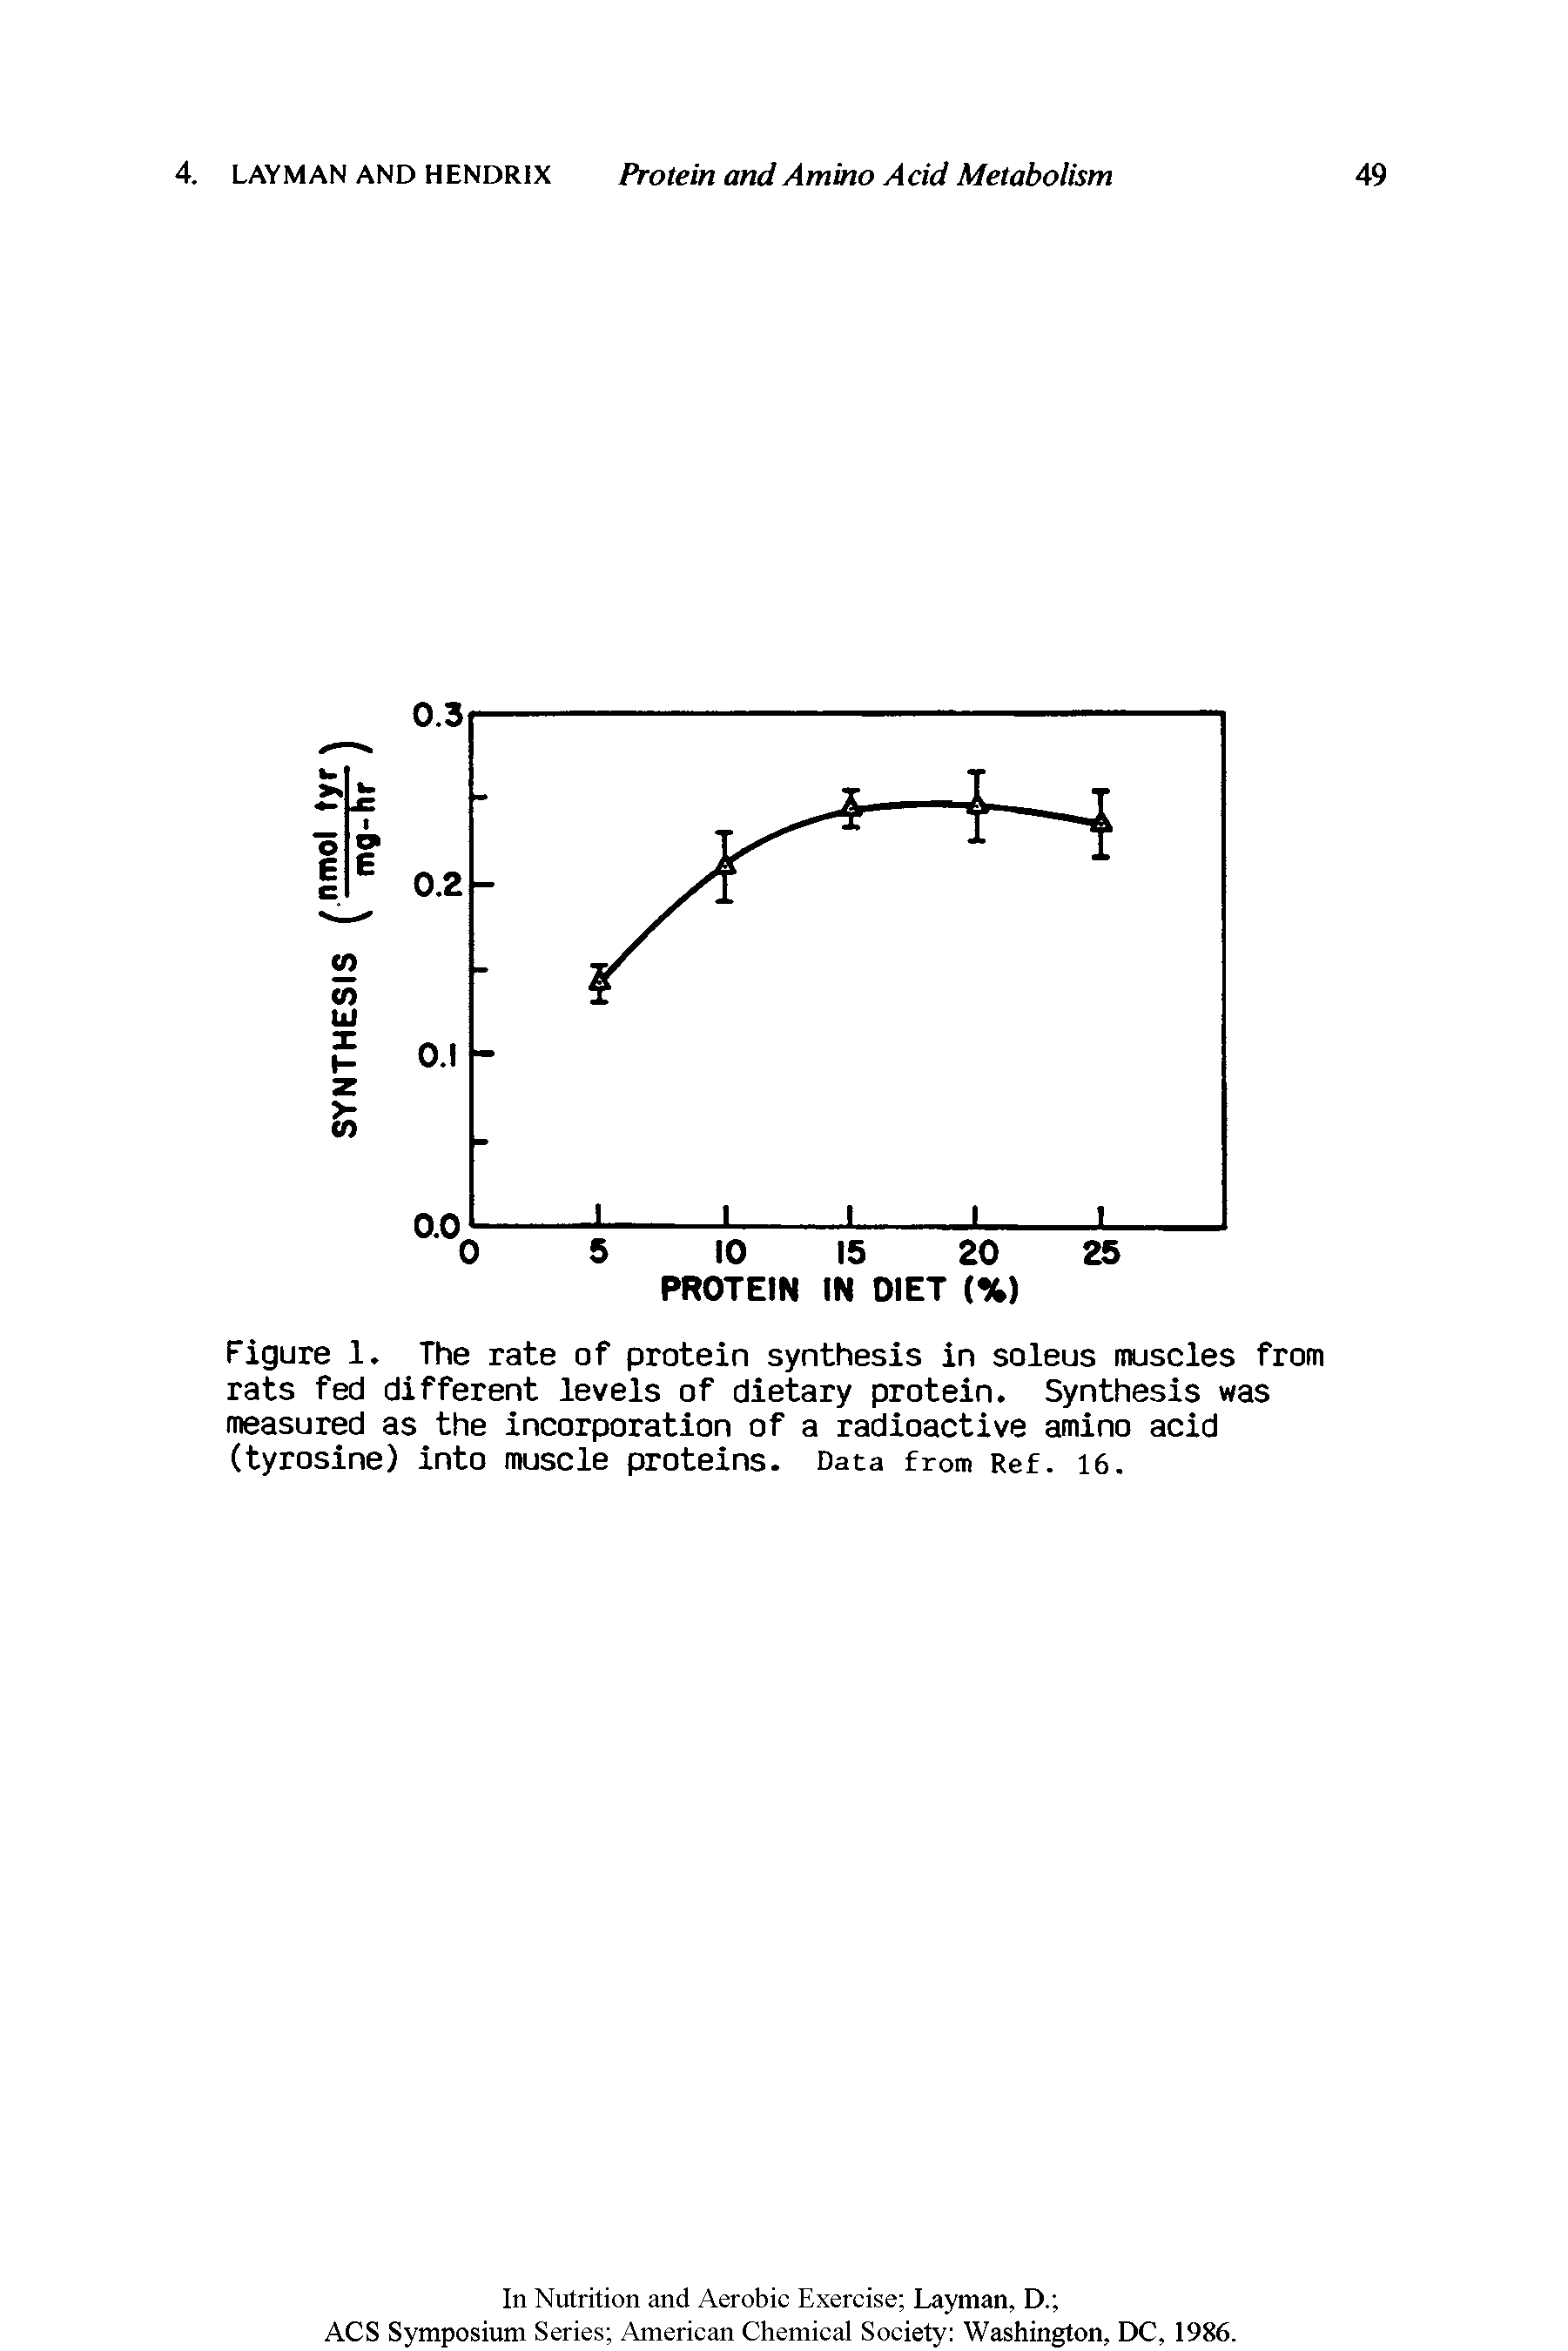 Figure 1. The rate of protein synthesis in soleus muscles from rats fed different levels of dietary protein. Synthesis was measured as the incorporation of a radioactive amino acid (tyrosine) into muscle proteins. Data from Ref. 16.